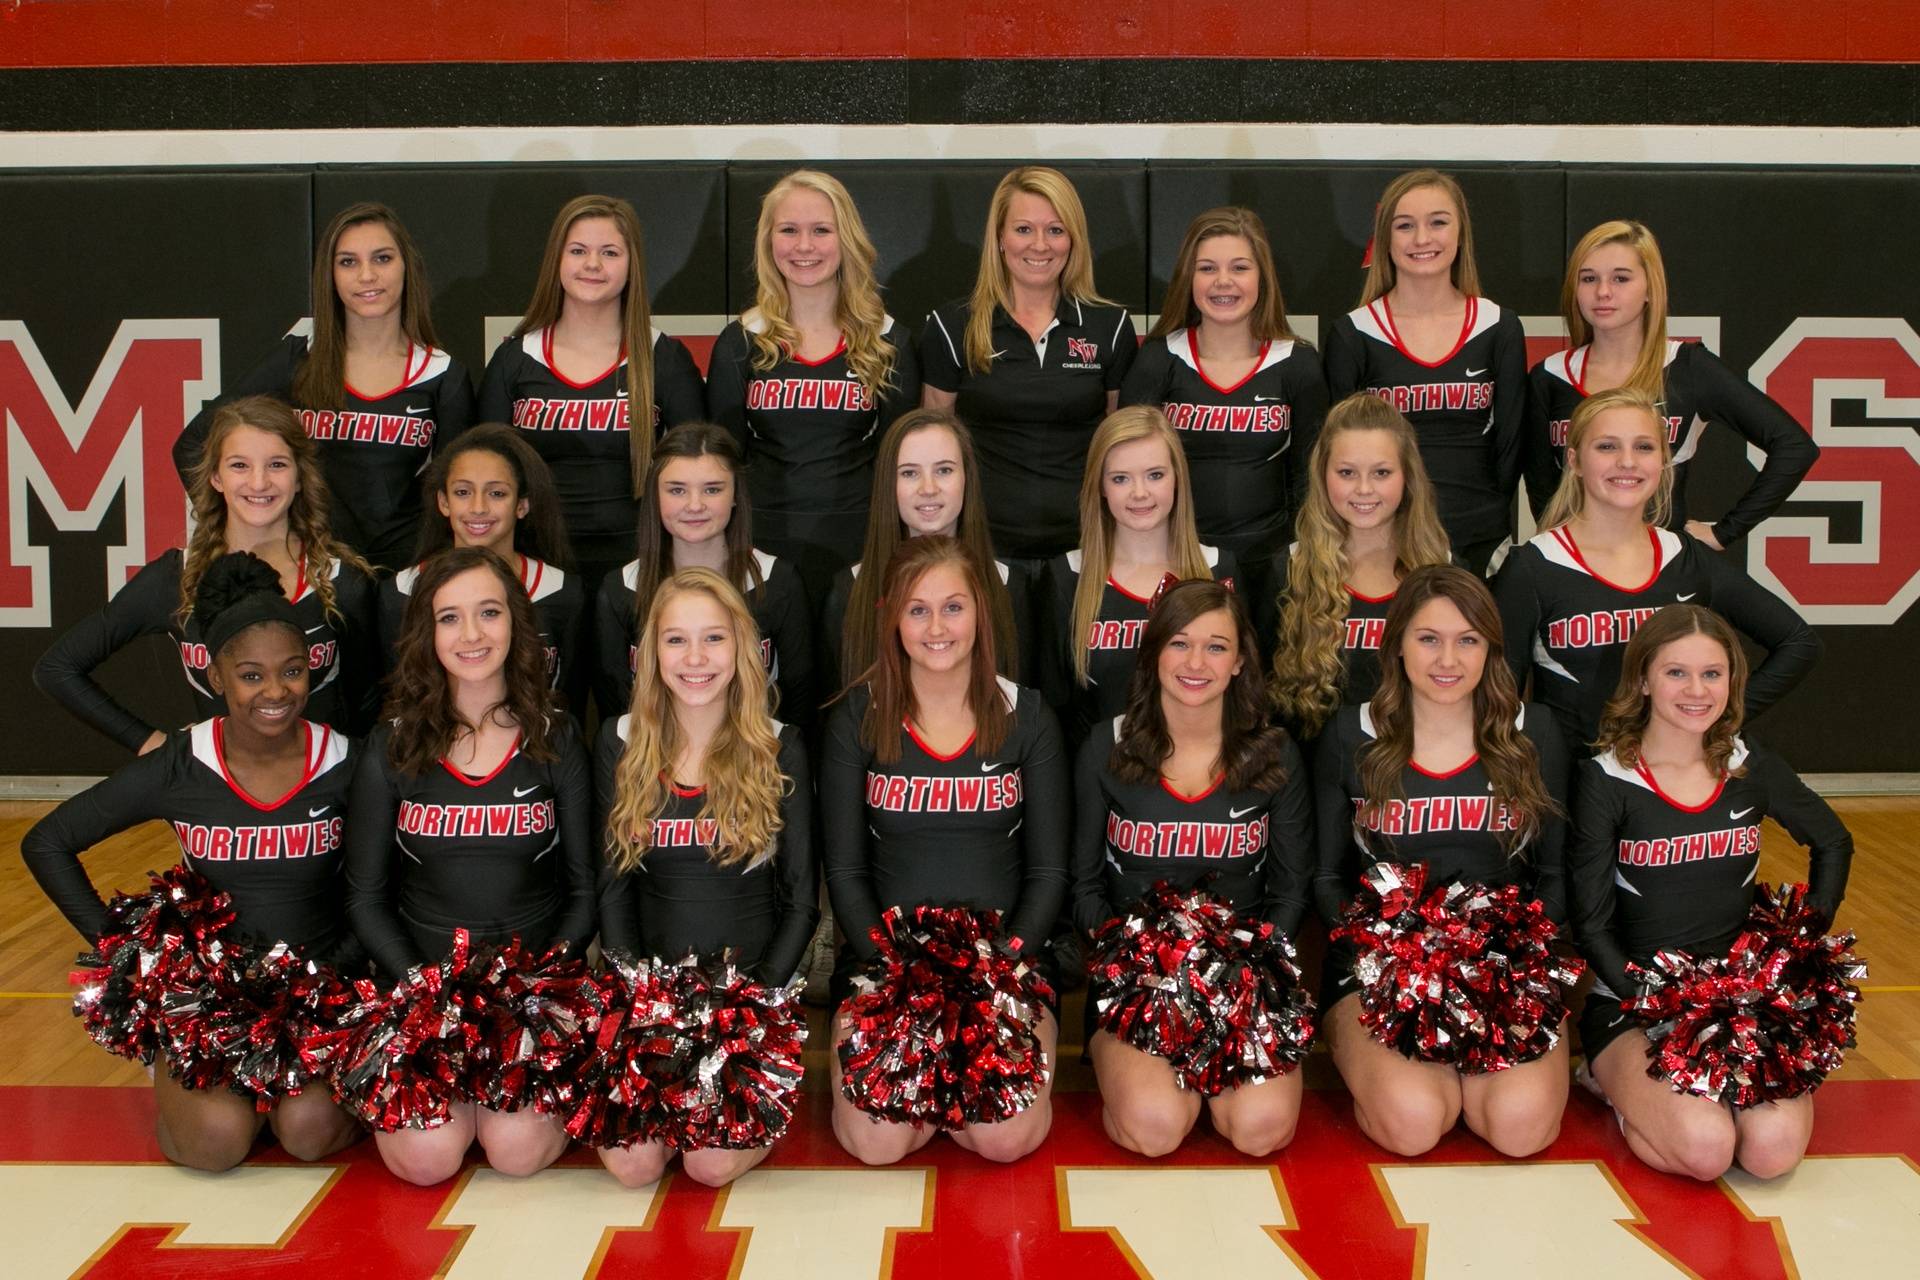 Varsity Competitive Cheer